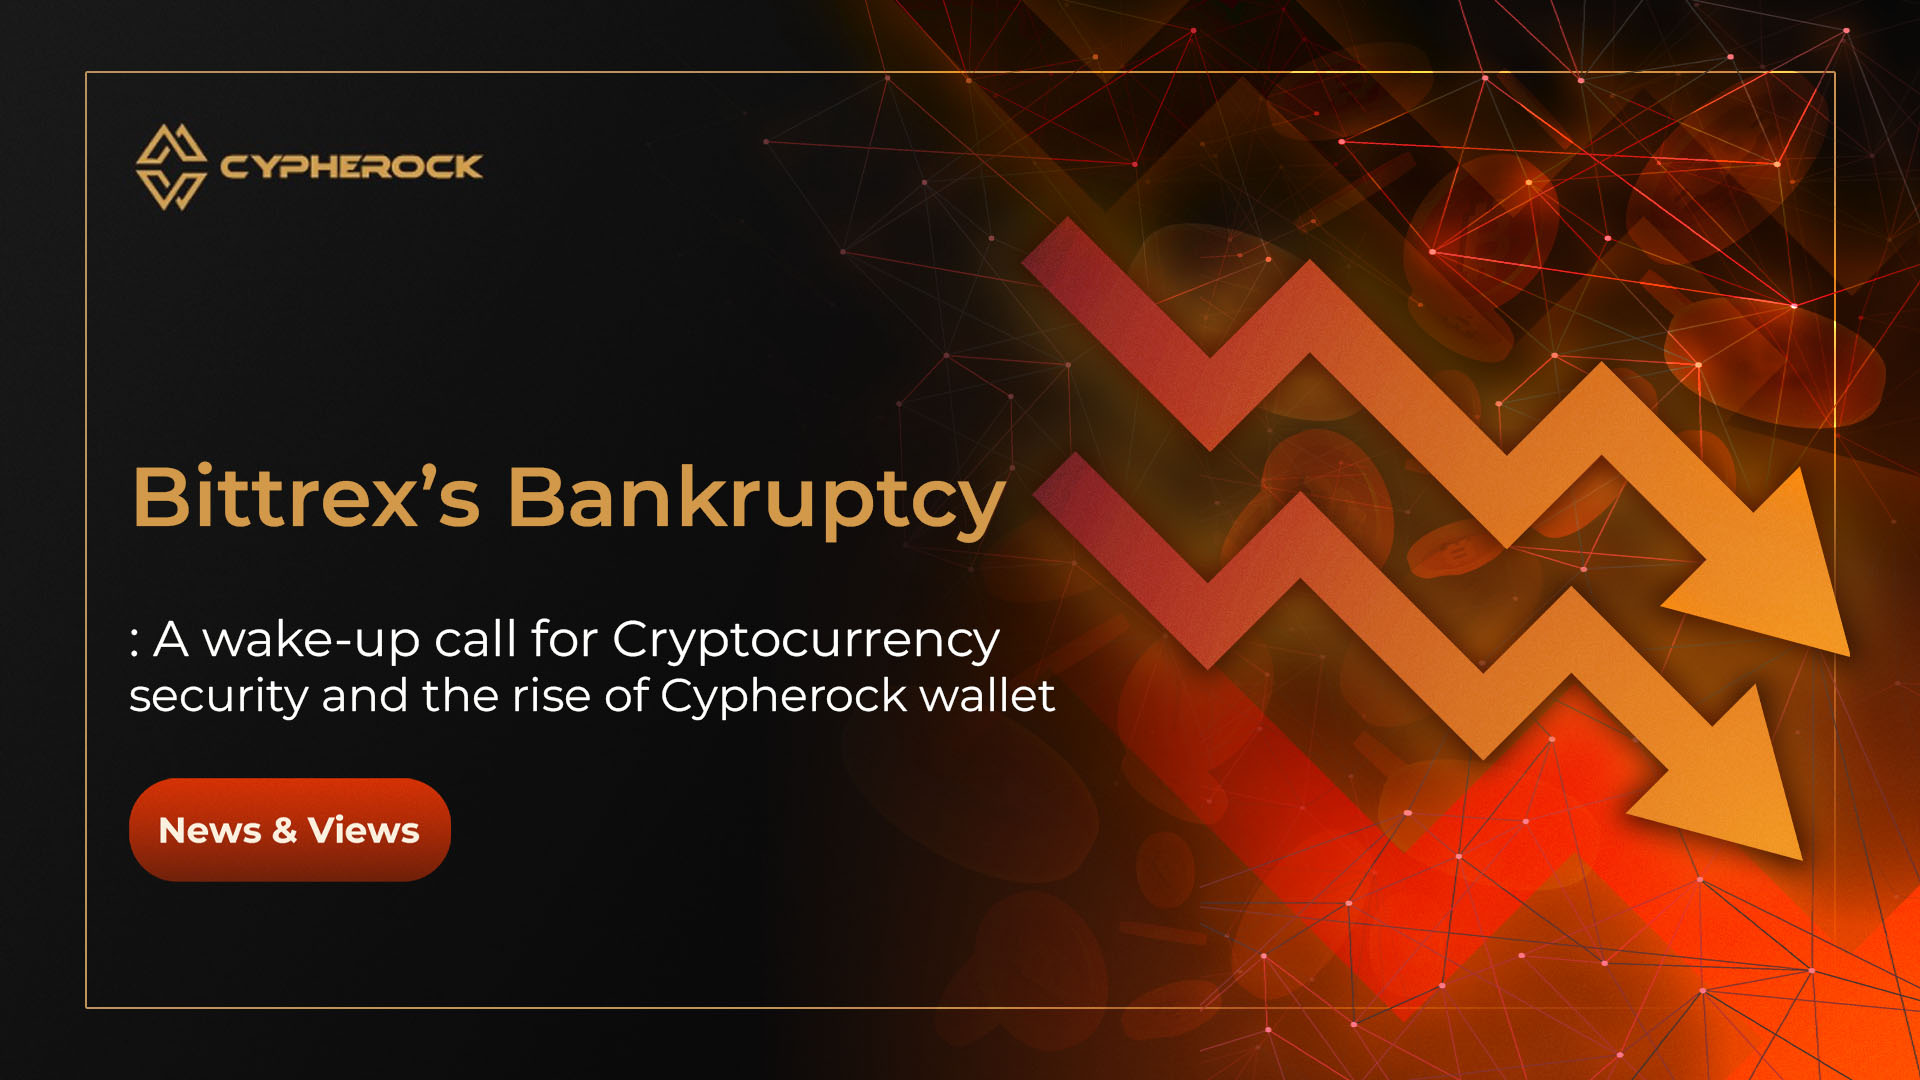 Bittrex's Bankruptcy: A Wake-Up Call for Cryptocurrency Security and the Rise of Cypherock Wallet